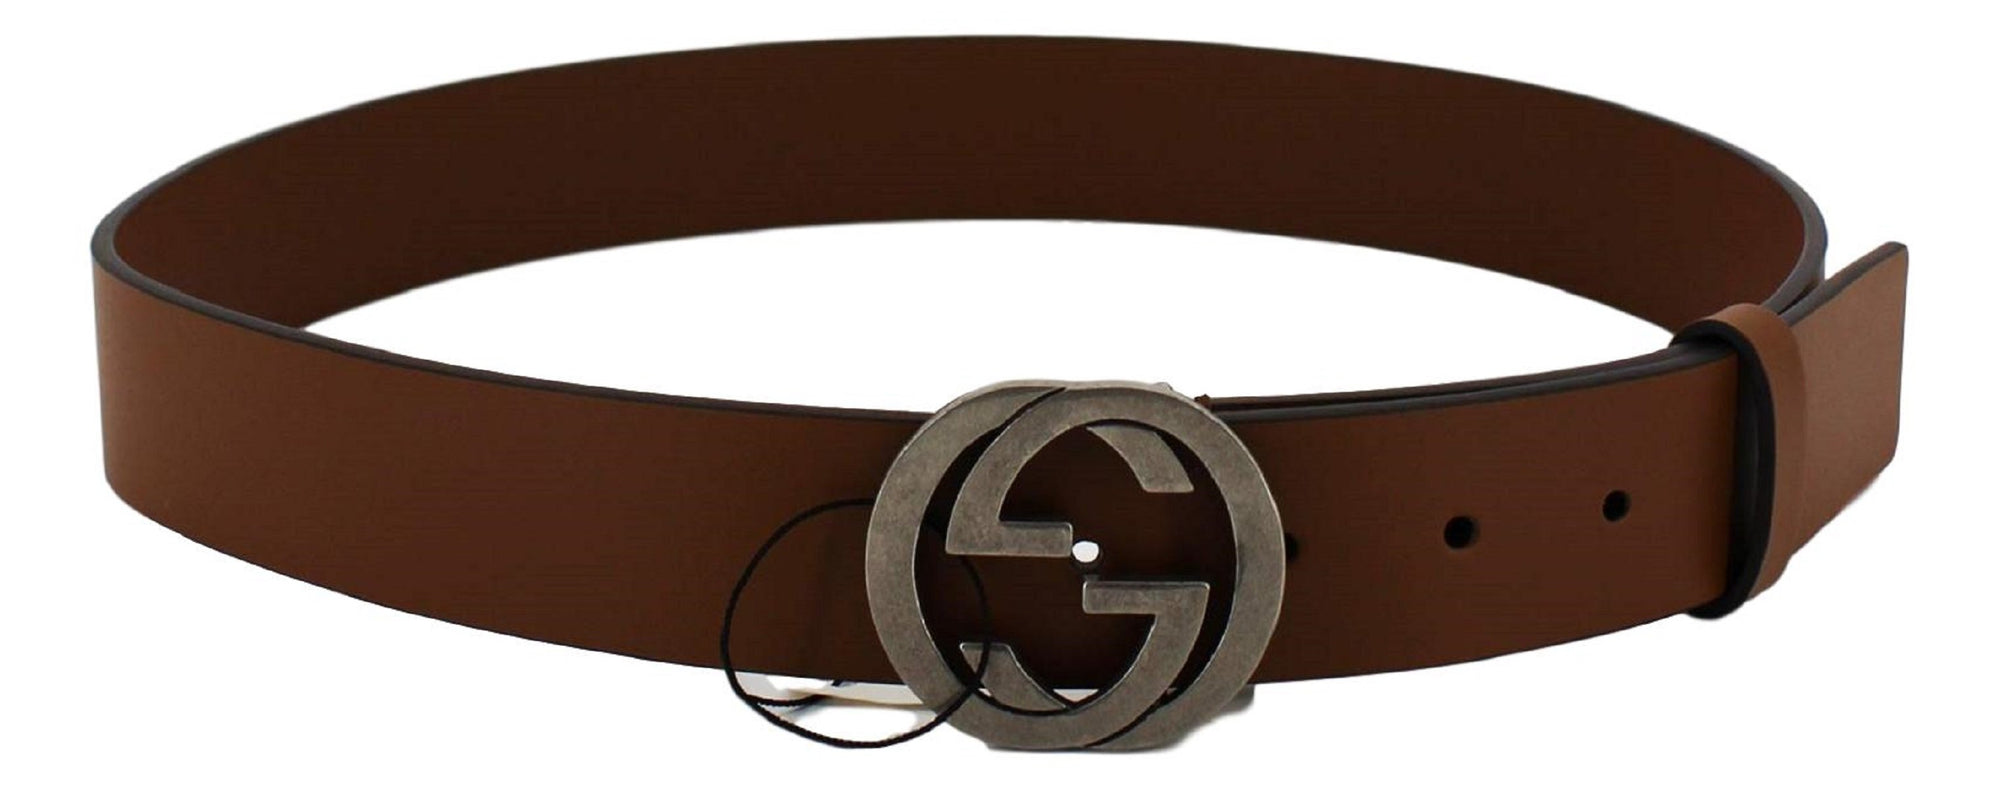 Gucci Brown Leather Silver Toned Hardware Interlocking G Buckle Belt 546389 95/38 at_Queen_Bee_of_Beverly_Hills